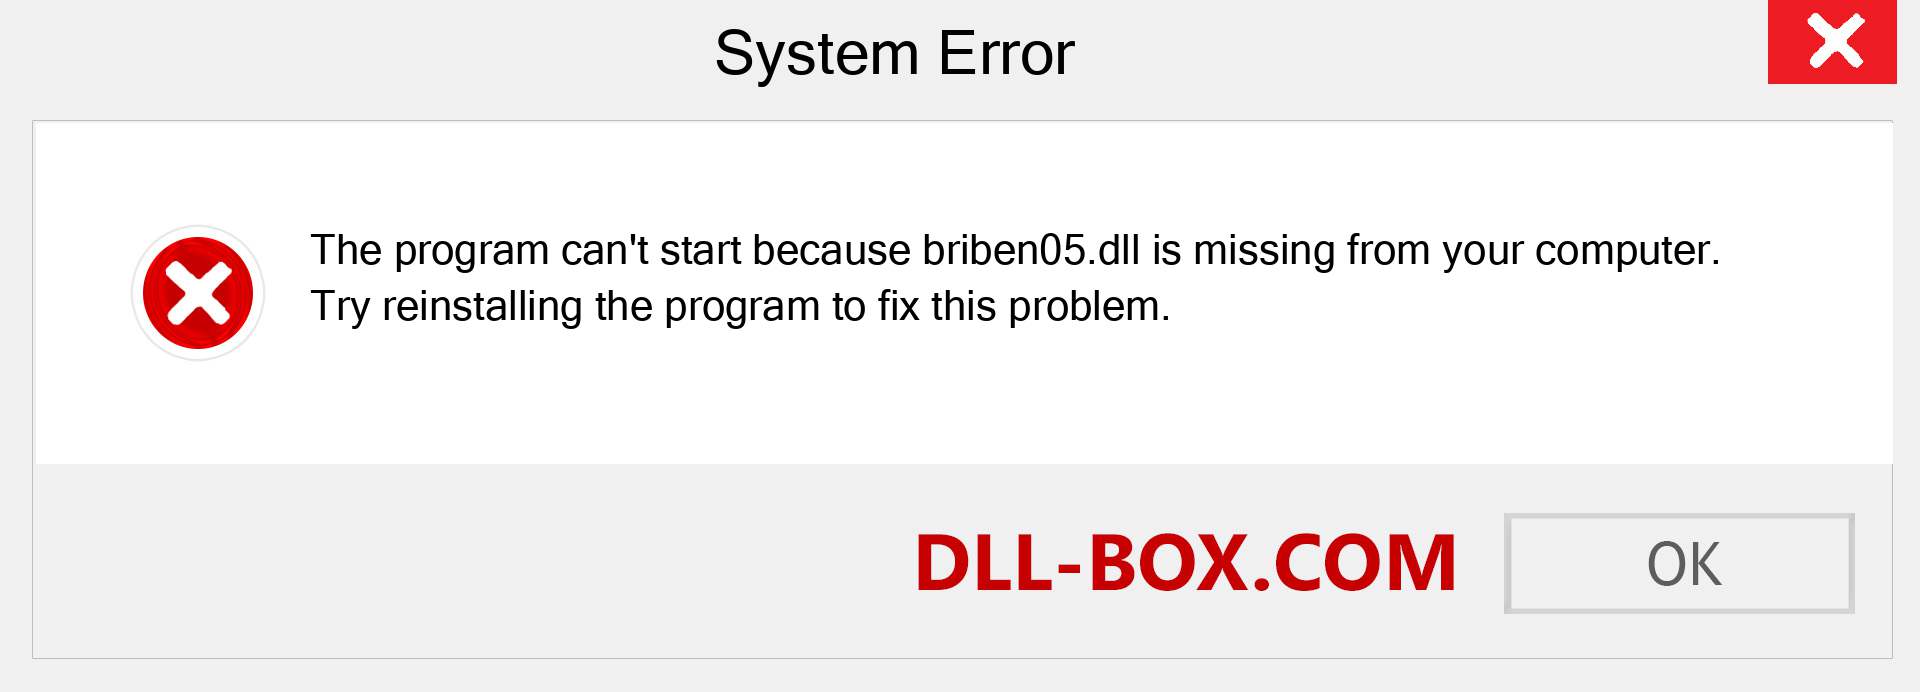  briben05.dll file is missing?. Download for Windows 7, 8, 10 - Fix  briben05 dll Missing Error on Windows, photos, images